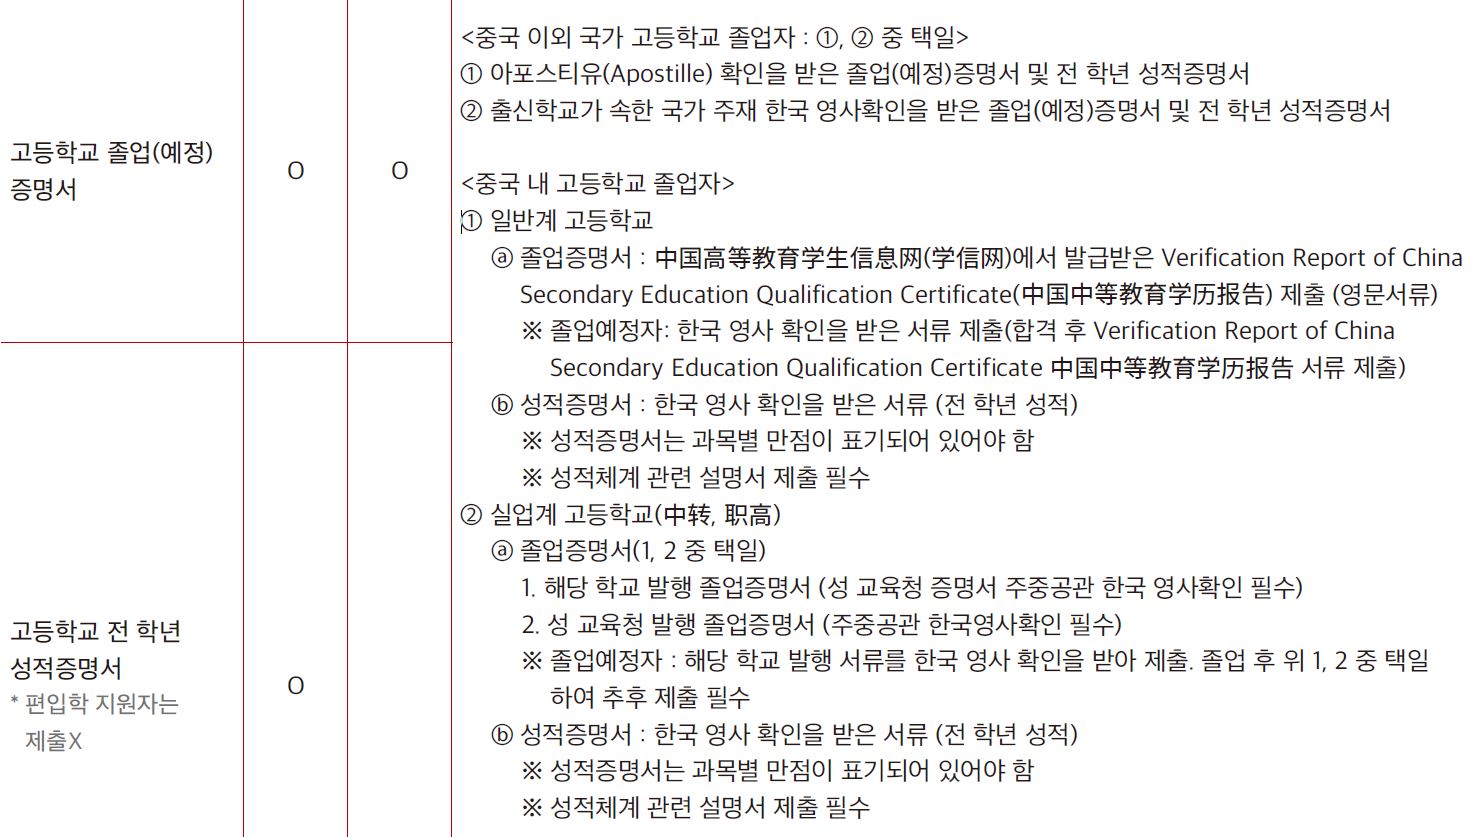 Sogang University Foreign Student Admission Required Documents_English Version 서강대 외국인전형 제출서류_영어본_02_제출서류.JPG